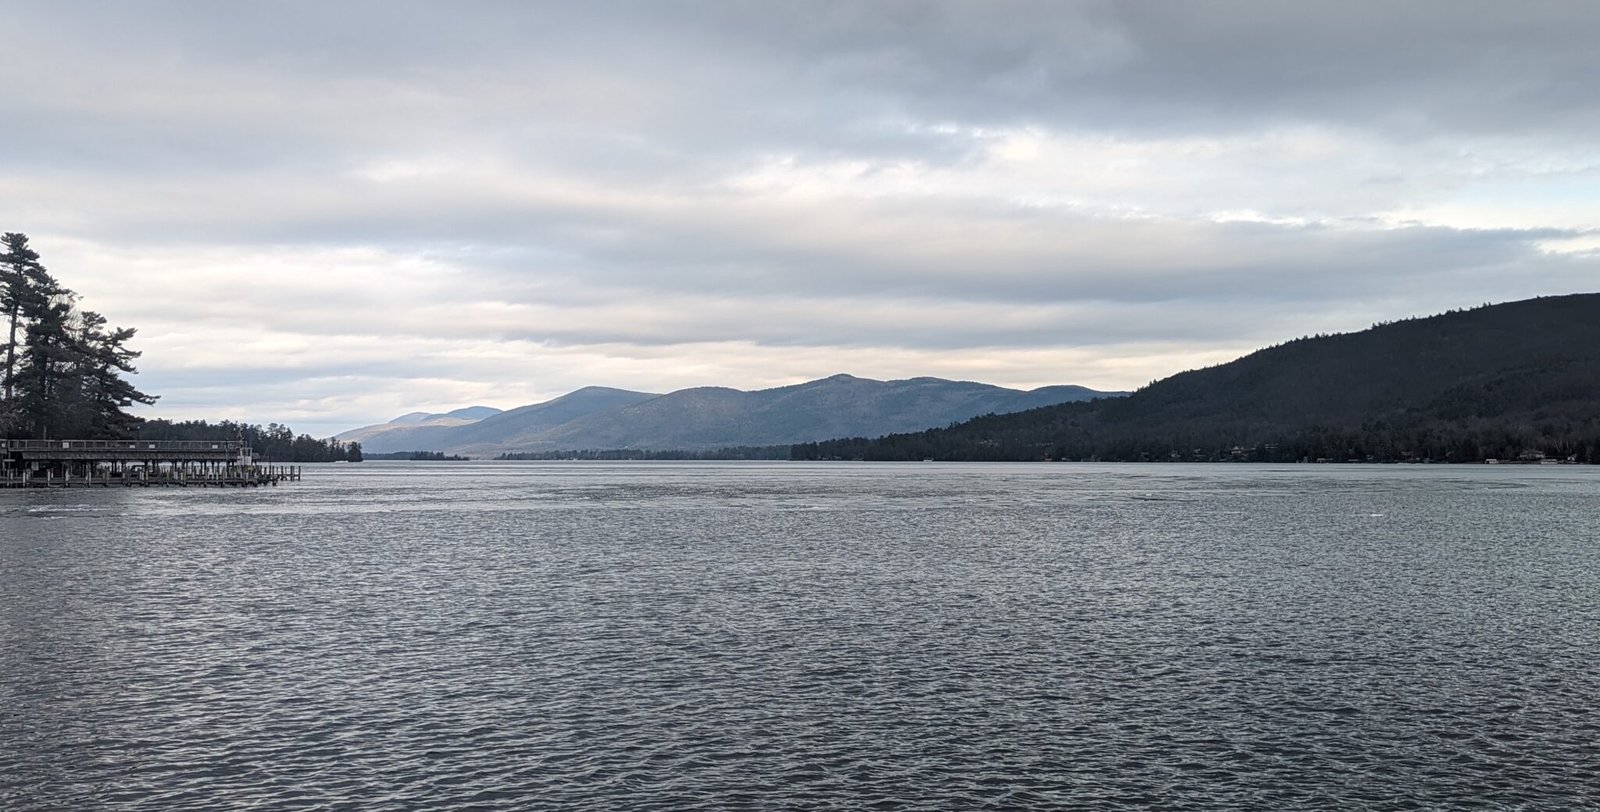 View of Lake George from the Courtyard by Marriott.